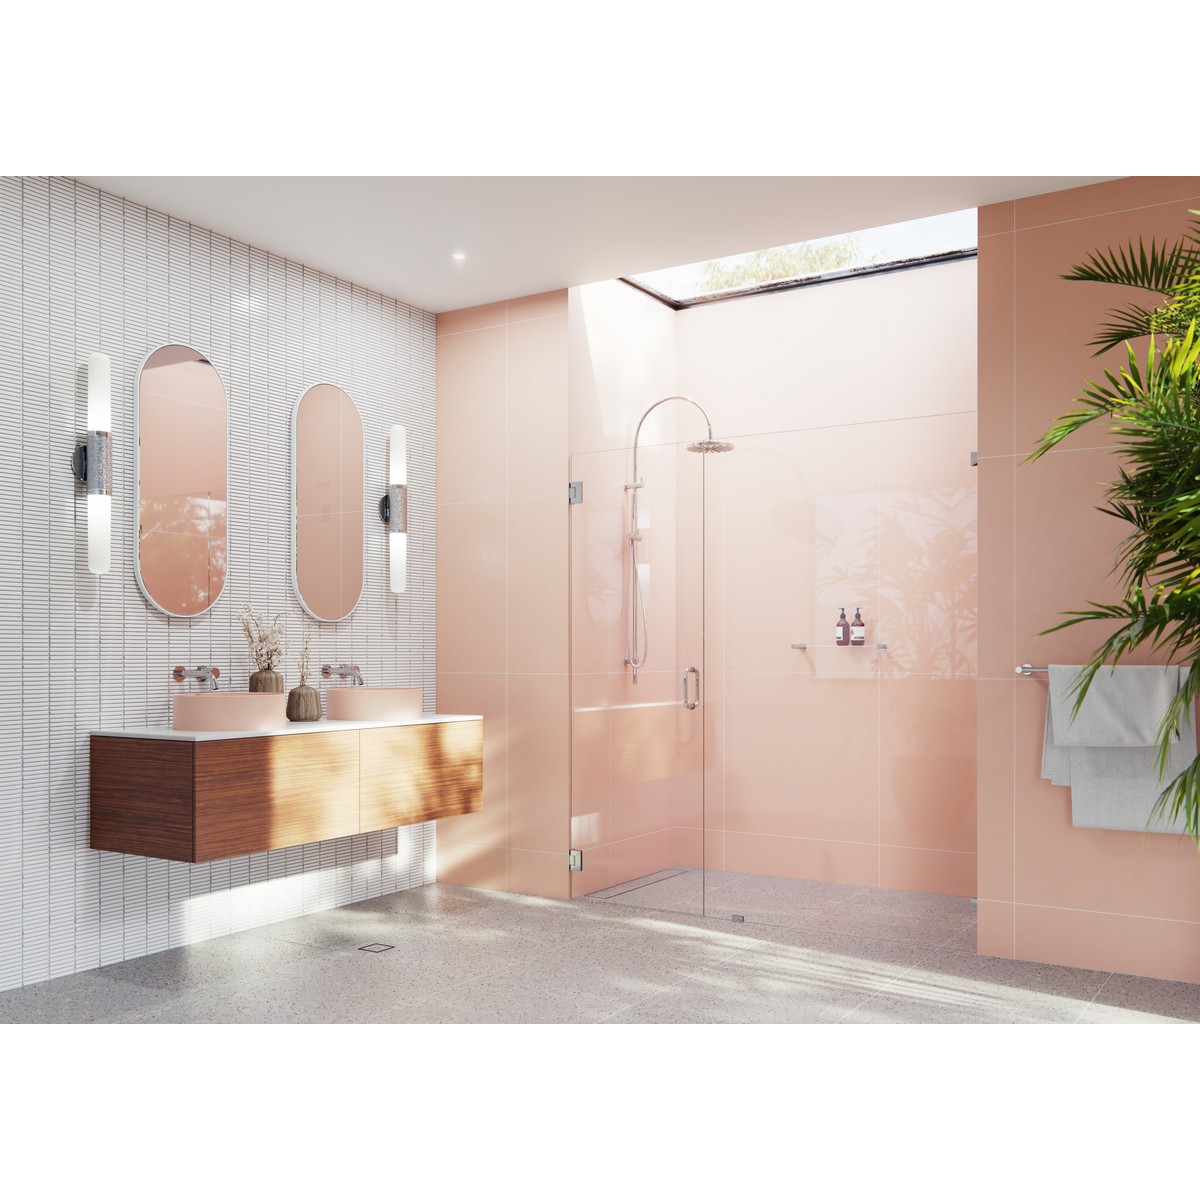 GLASS WAREHOUSE GW-WH-77.5 ILLUME 77 1/2 W X 78 H WALL HINGED FULLY FRAMELESS GLASS SHOWER ENCLOSURE